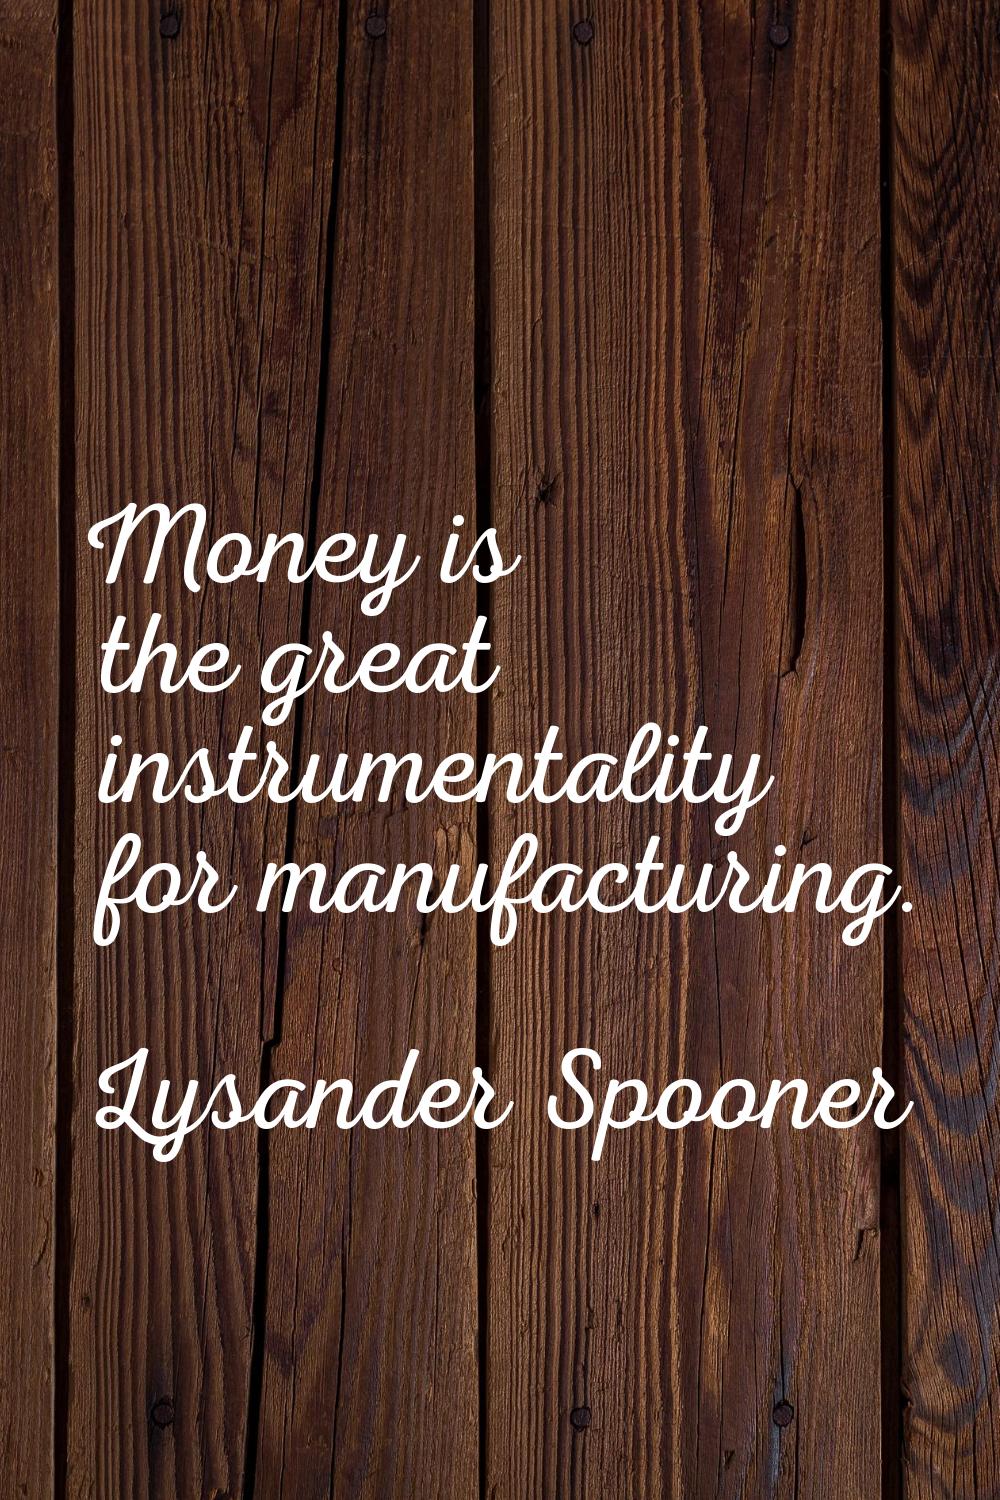 Money is the great instrumentality for manufacturing.